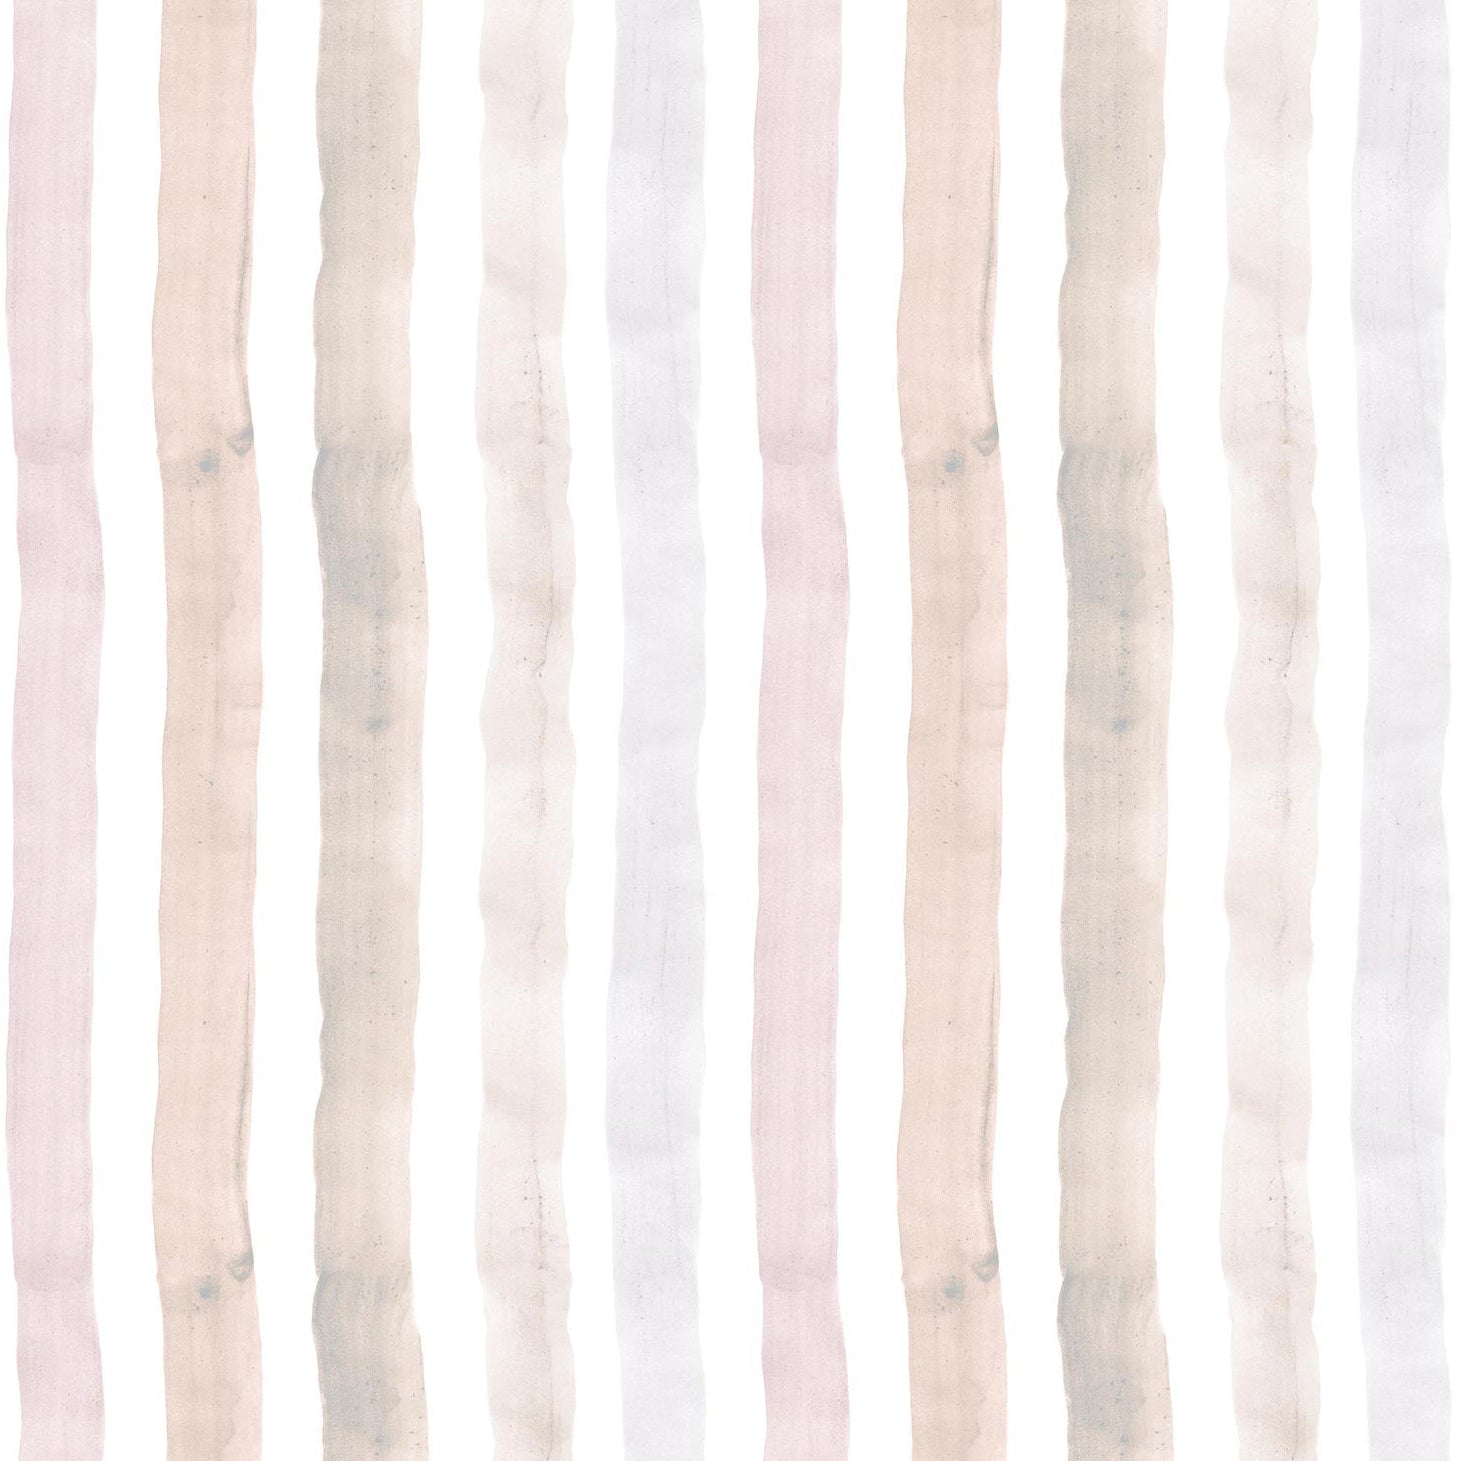 Detail of wallpaper in a painterly stripe print in shades of pink, gray and cream on a white field.